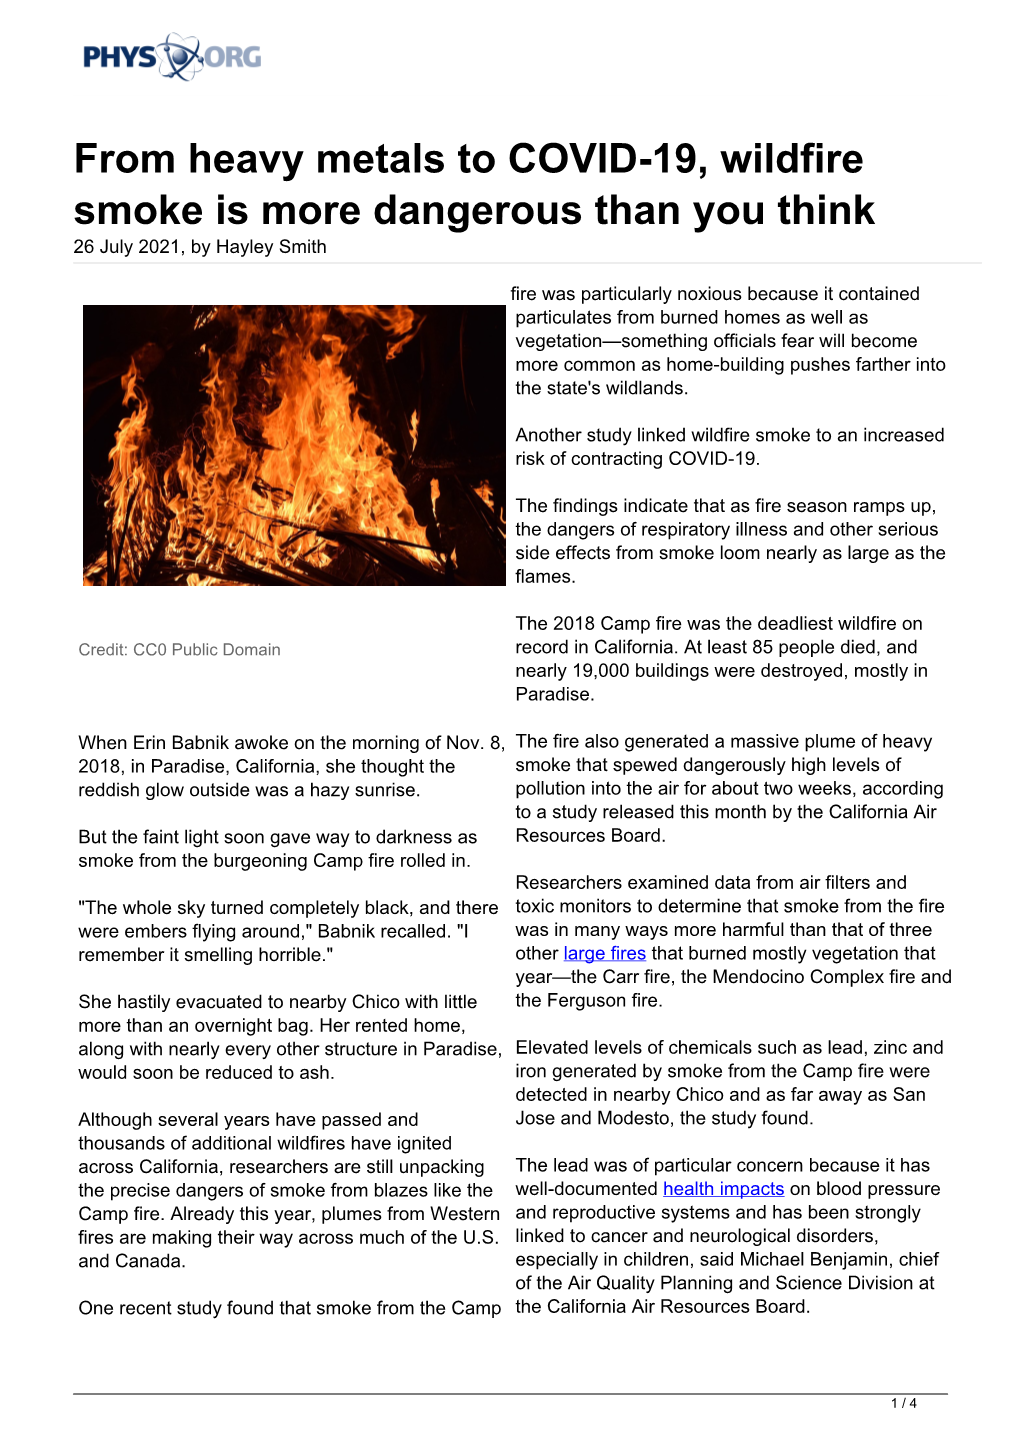 From Heavy Metals to COVID-19, Wildfire Smoke Is More Dangerous Than You Think 26 July 2021, by Hayley Smith